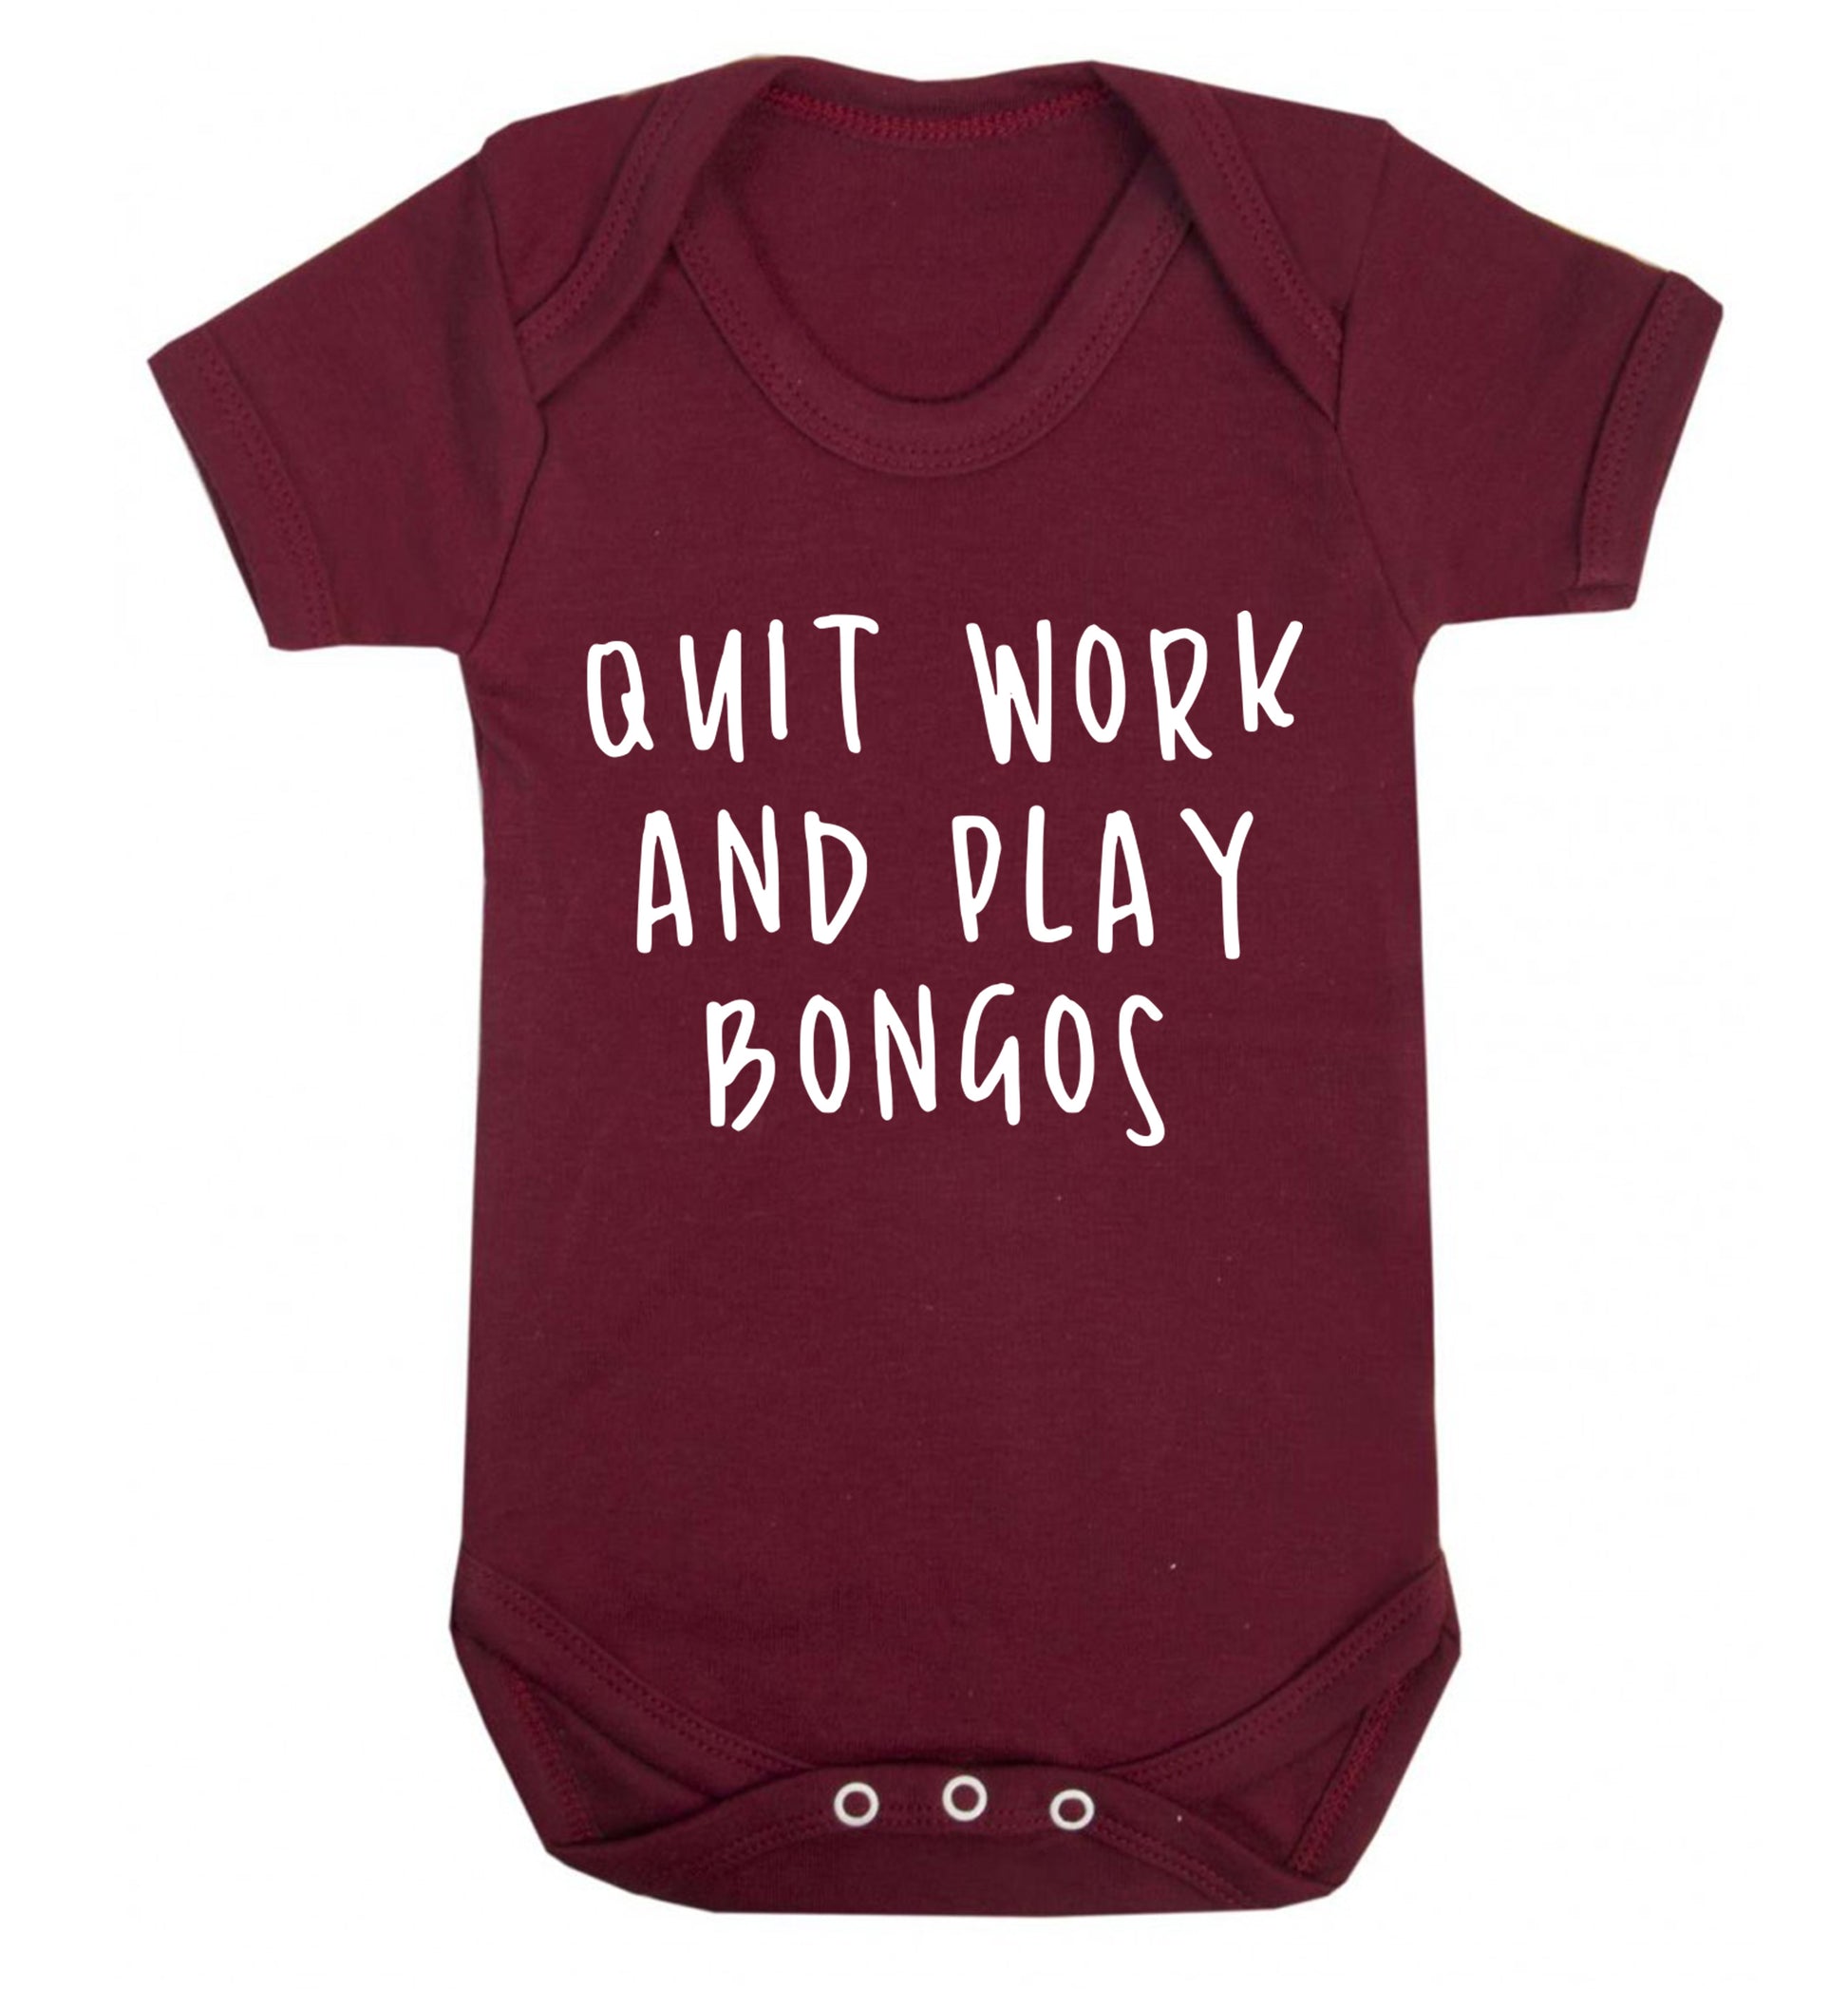 Quit work and play bongos Baby Vest maroon 18-24 months